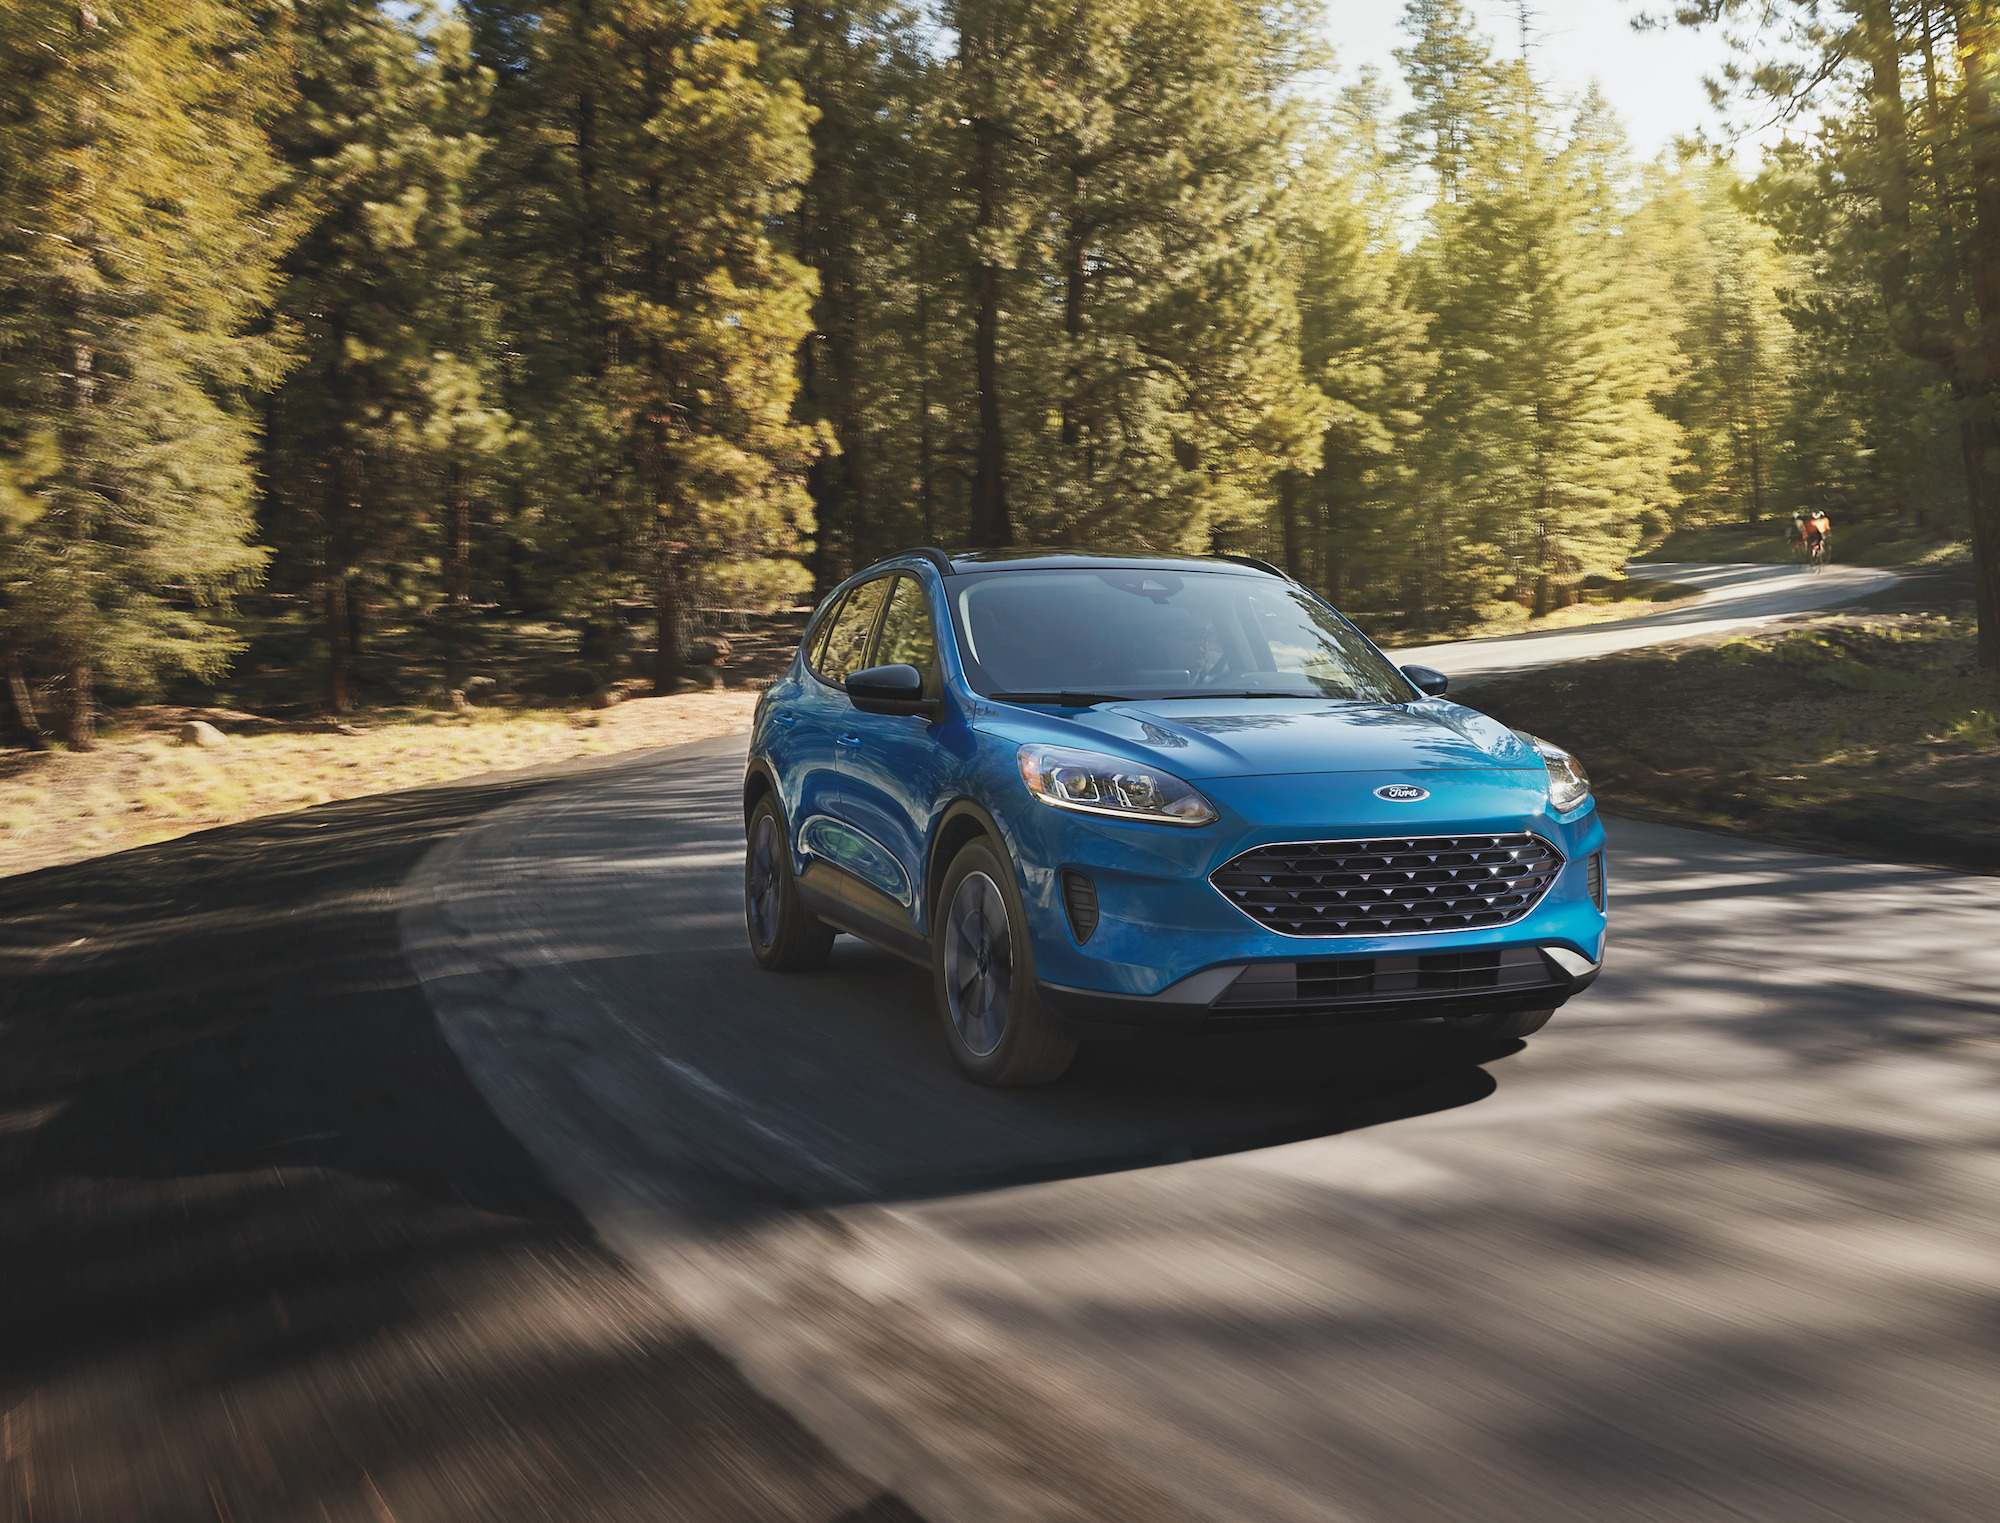 A blue 2021 Ford Escape compact SUV travels on a winding road through pine trees